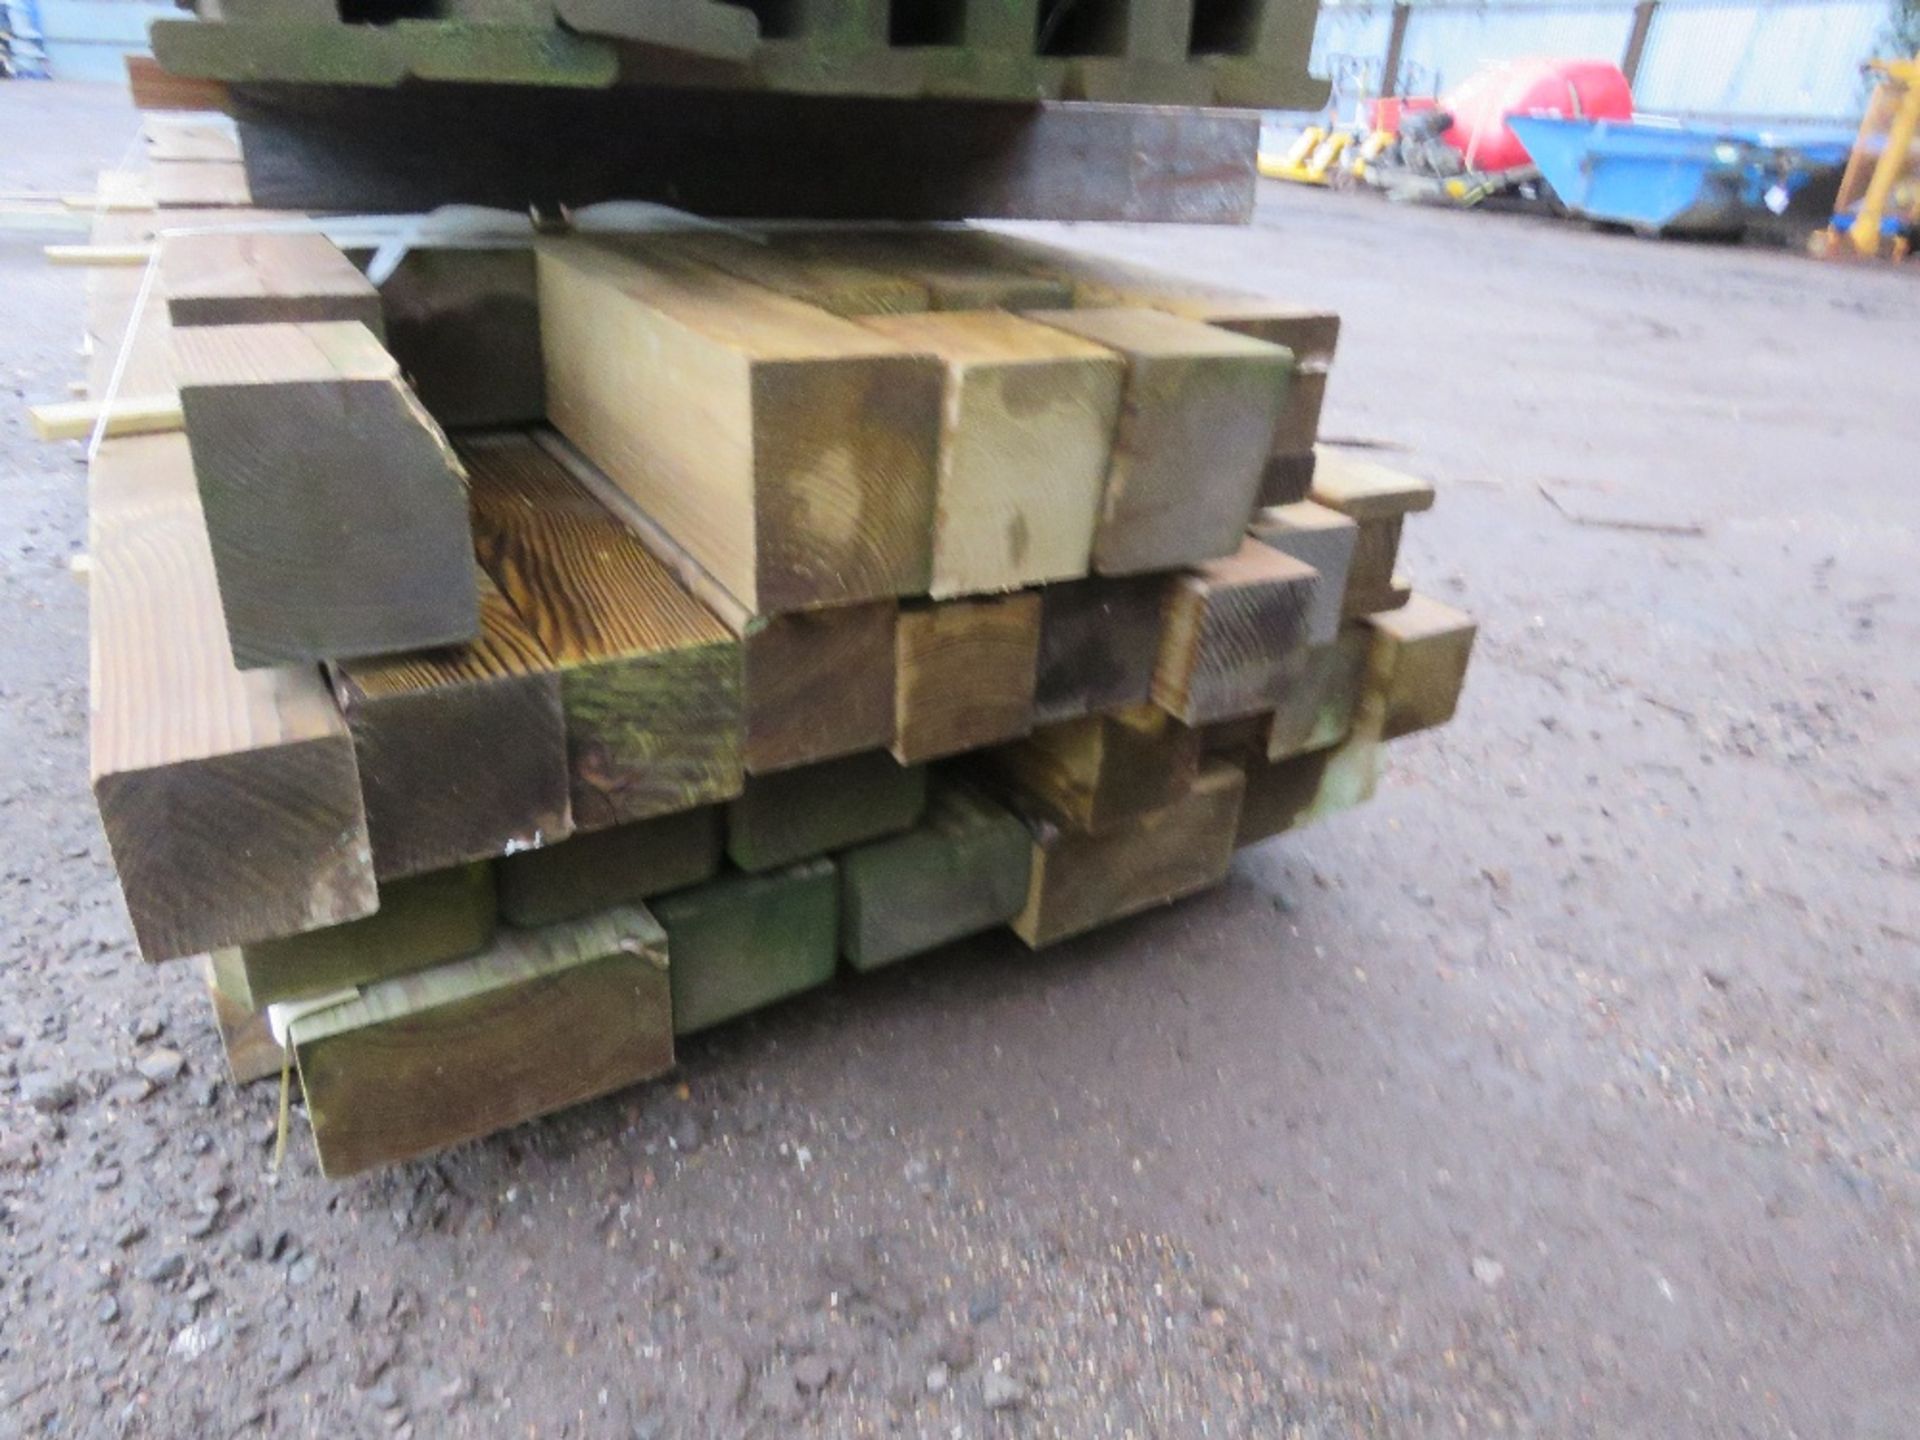 QUANTITY OF TIMBER POSTS, 6-11FT LENGTH APPROX. - Image 9 of 10